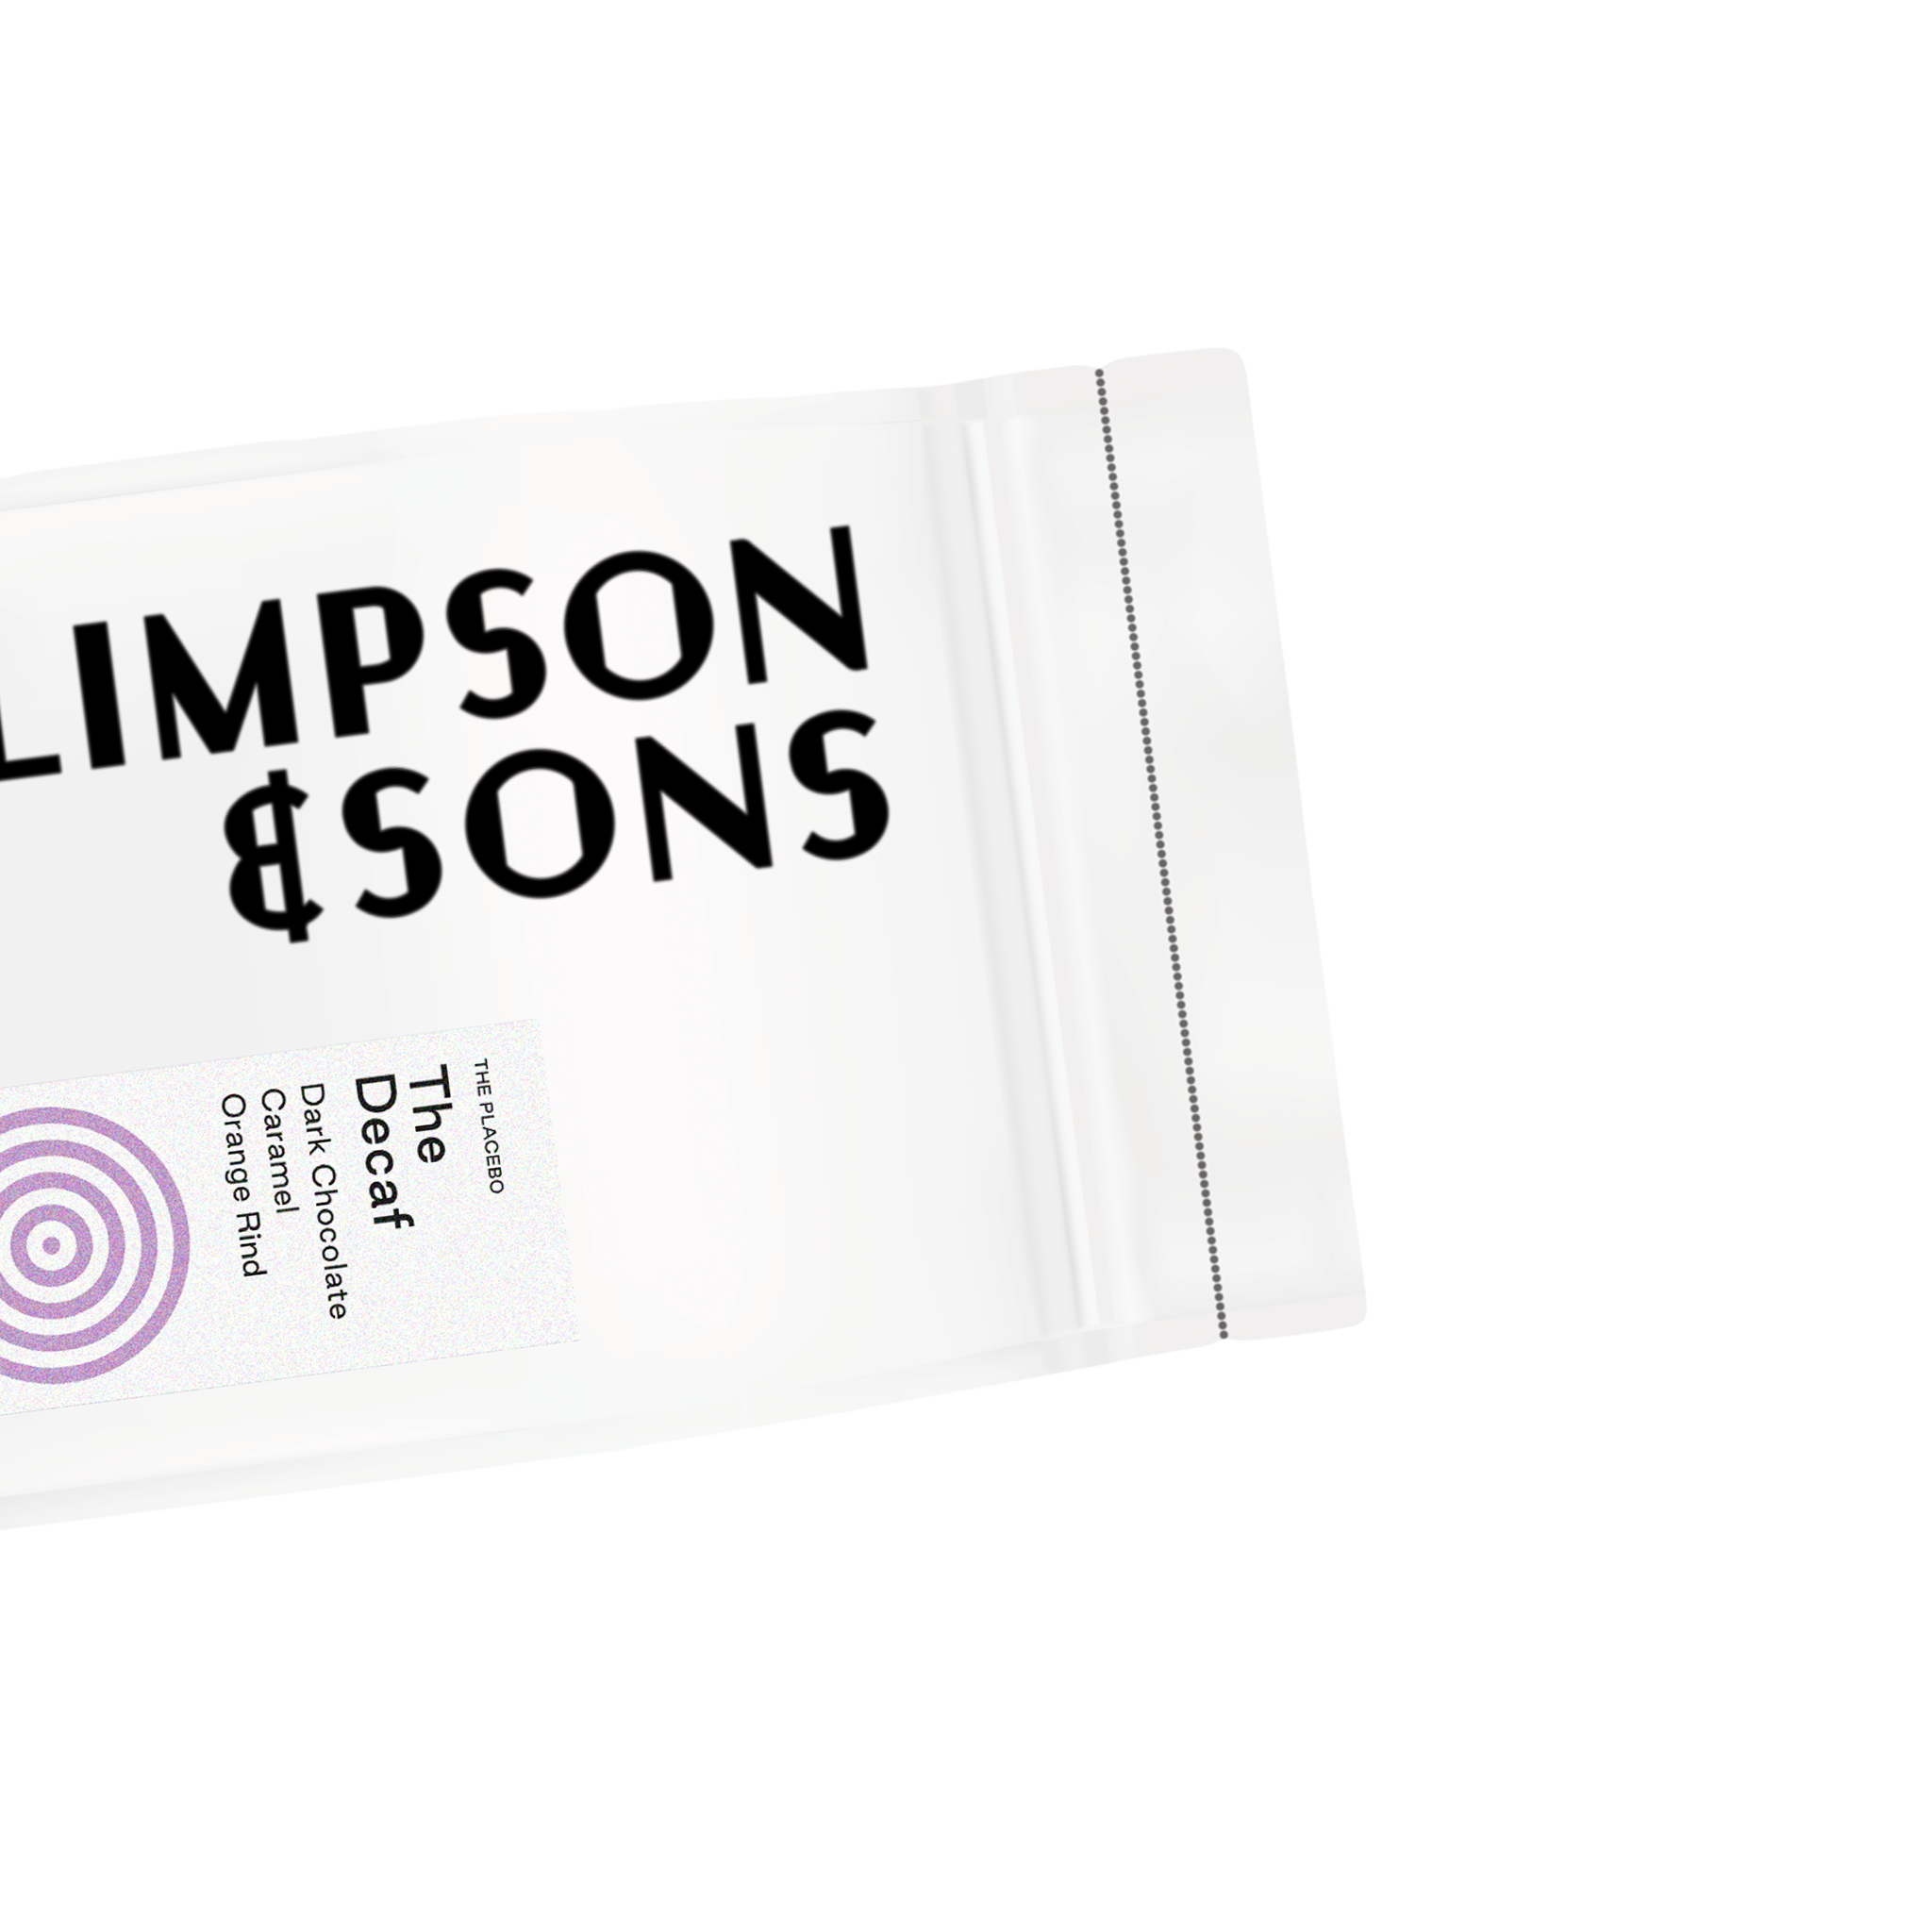 The Decaf - Climpson & Sons - Colombia - 2